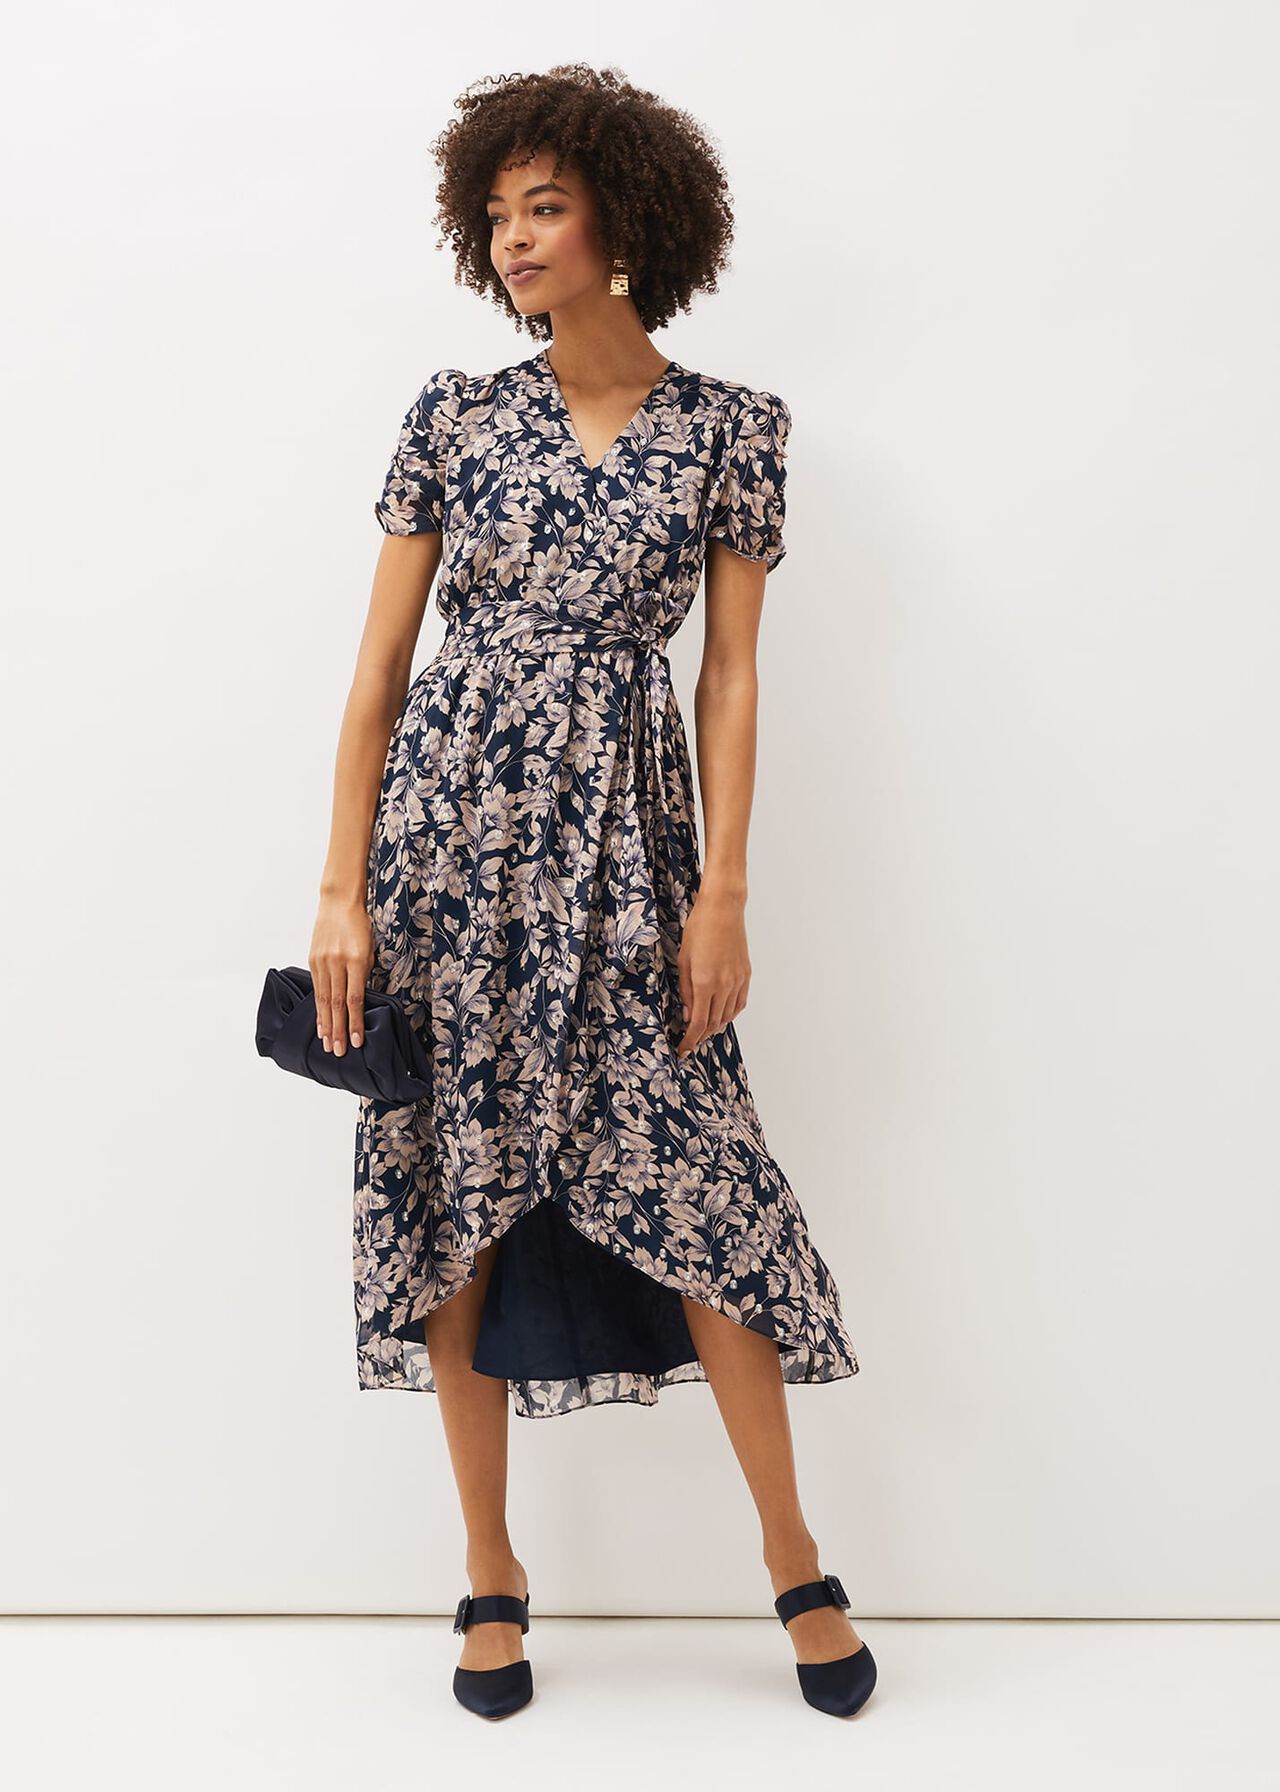 ${product-id}-Zendaya Floral Dress Outfit--${view-type}